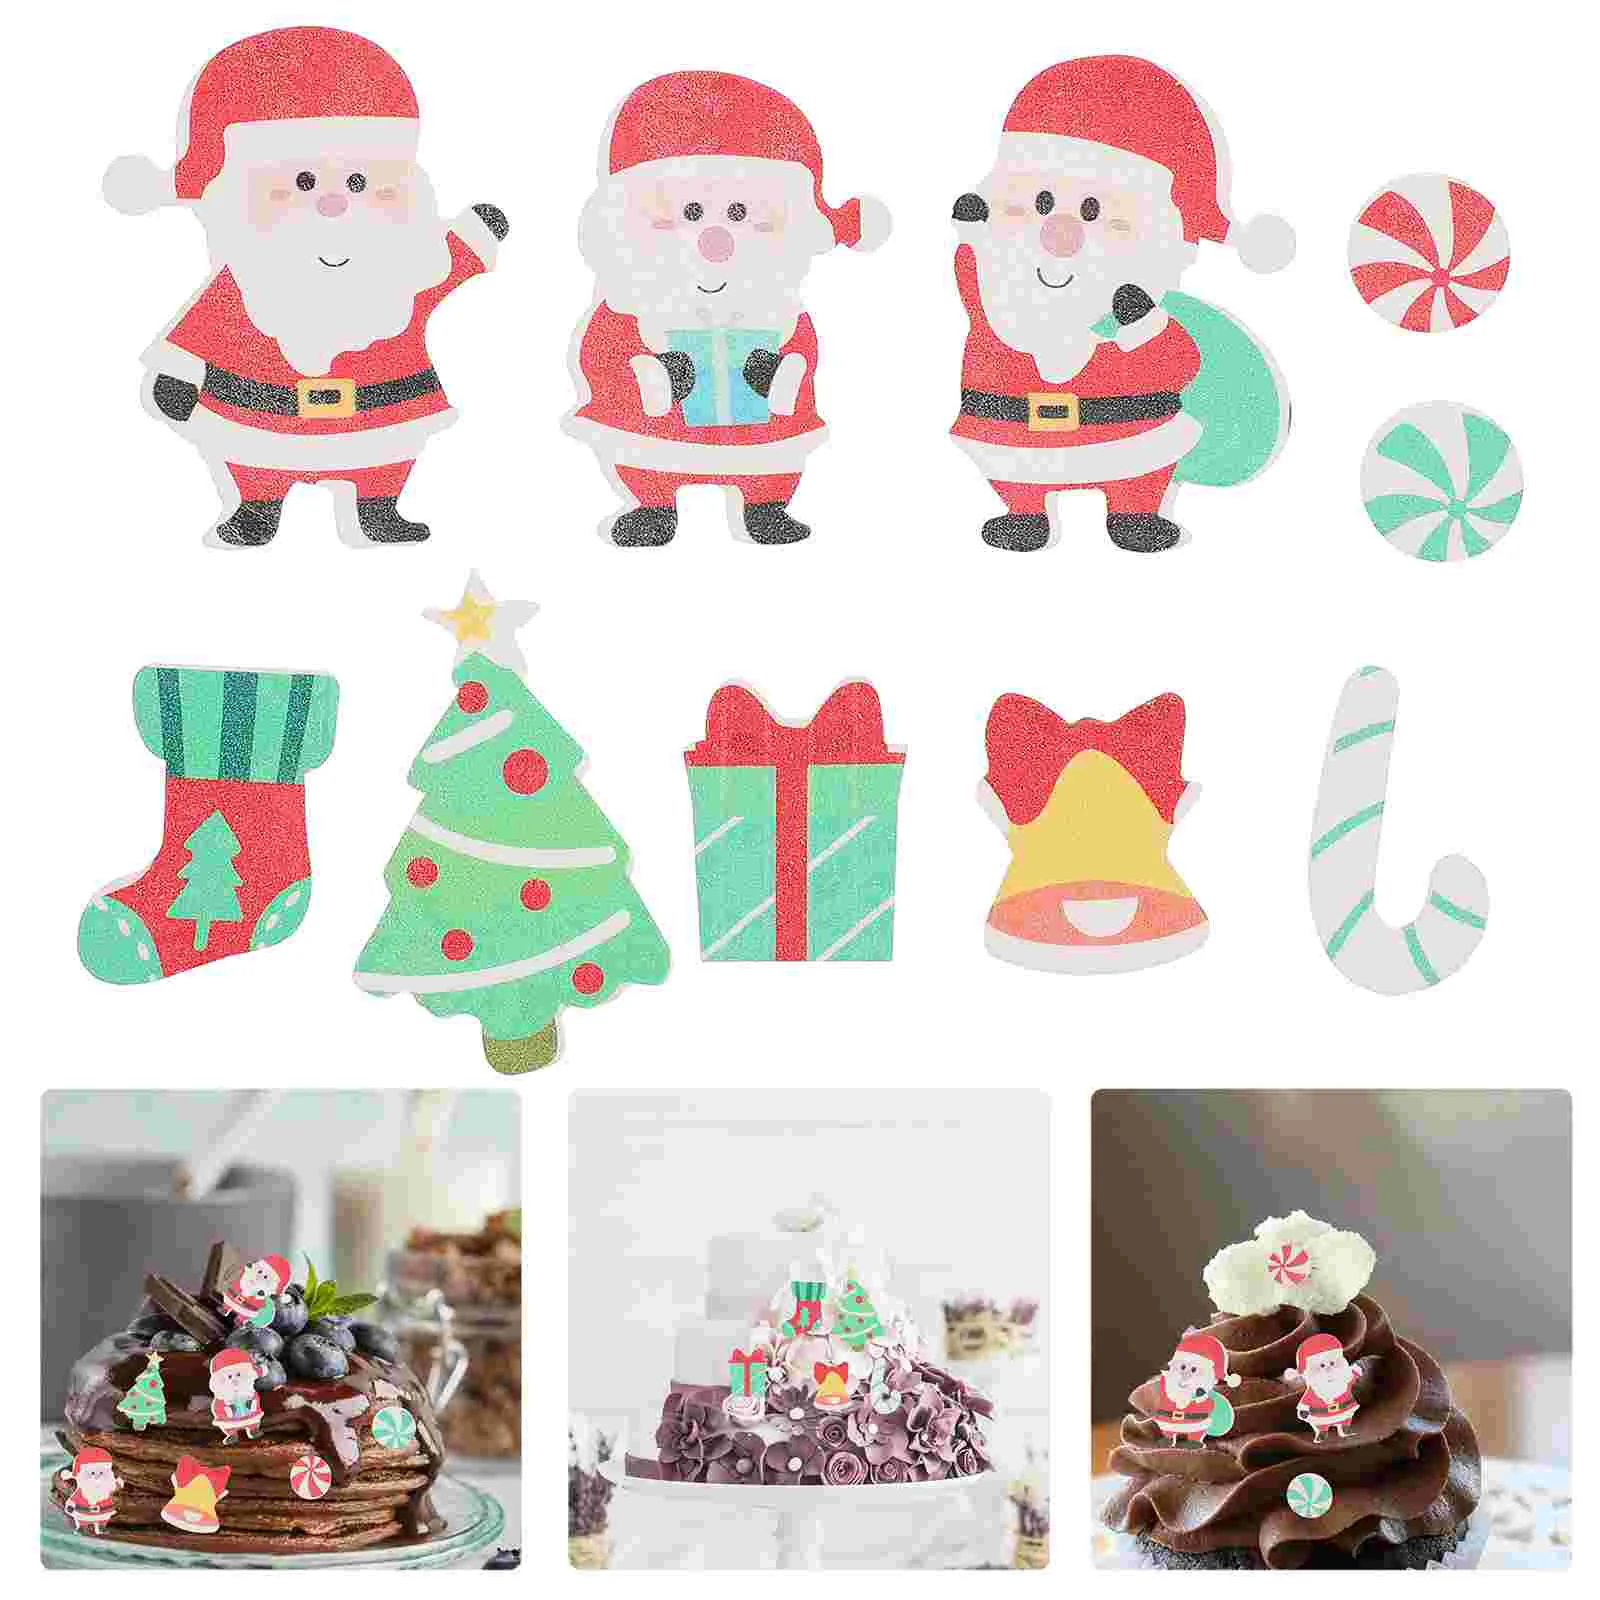 

Cake Christmas Edible Cupcake Toppers Paper Wafer Topper Decoration Dessert Rice Holiday Decorationspicks Santa Sugar Papers